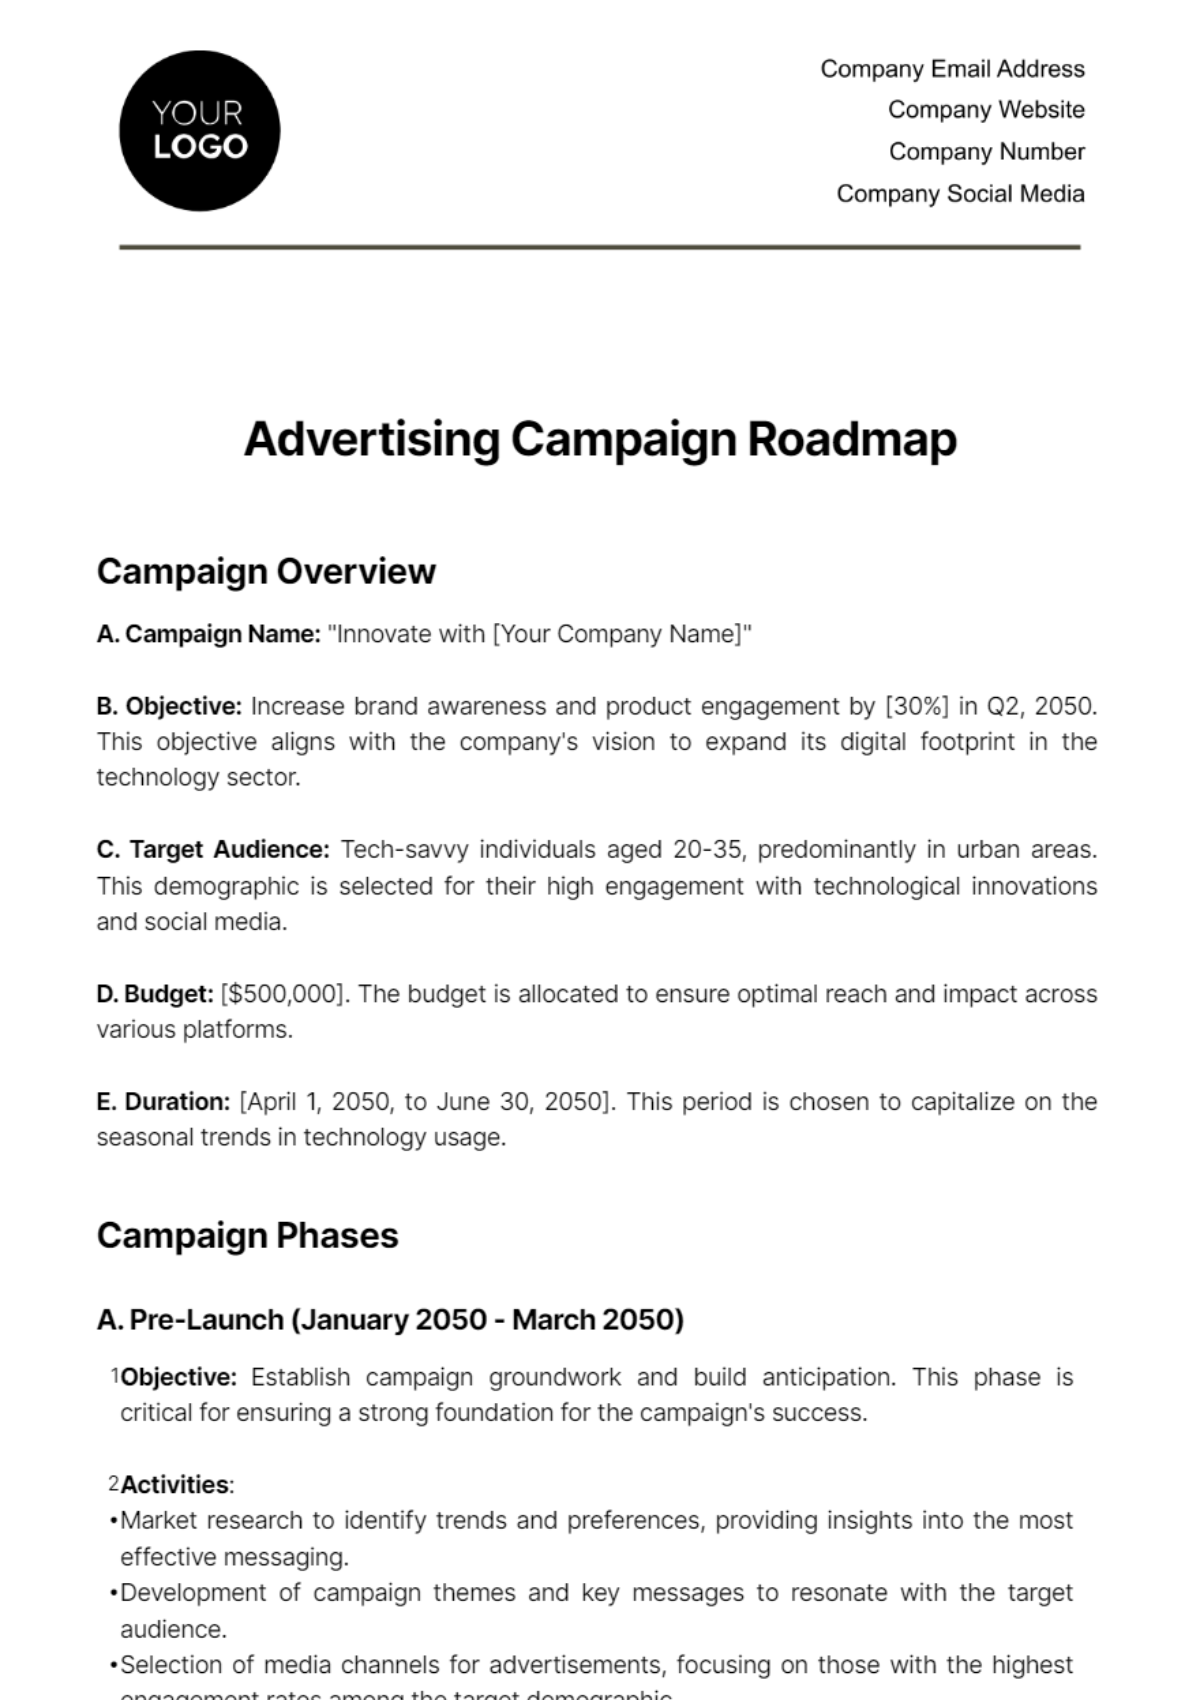 Free Advertising Campaign Roadmap Template